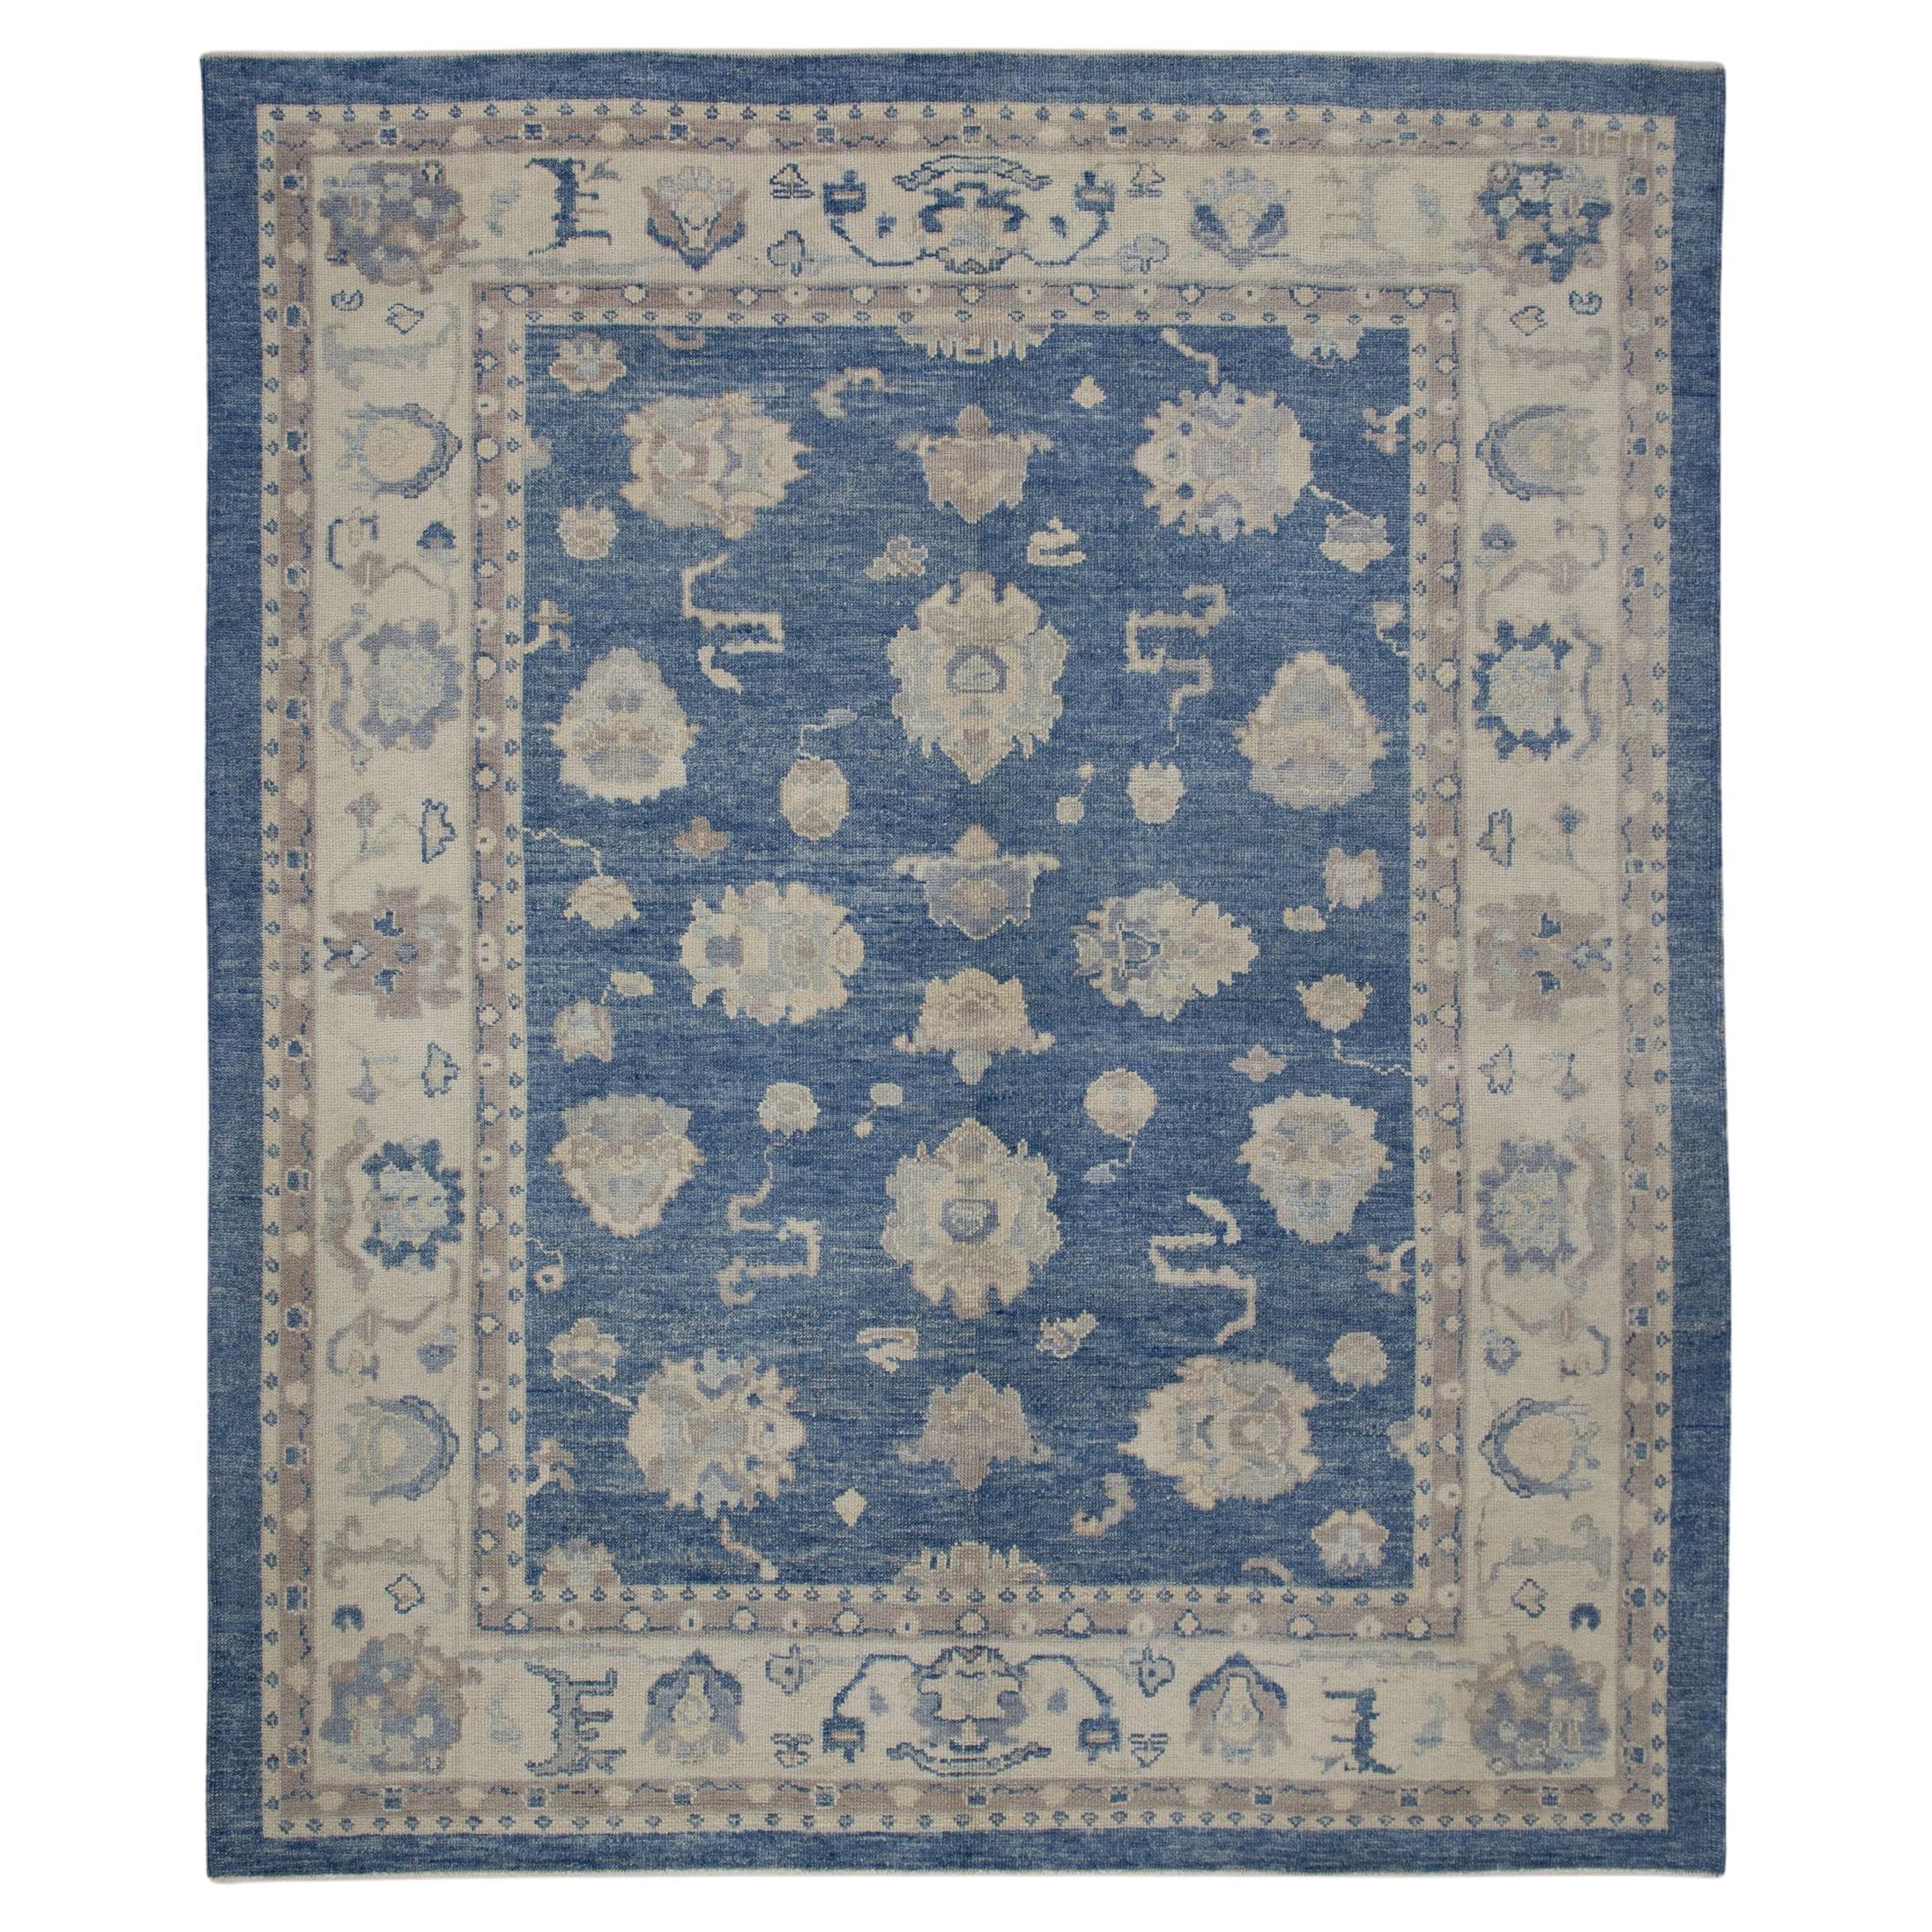 Floral Handwoven Wool Turkish Oushak Rug in Blue and Cream 8'9" x 10'1" For Sale